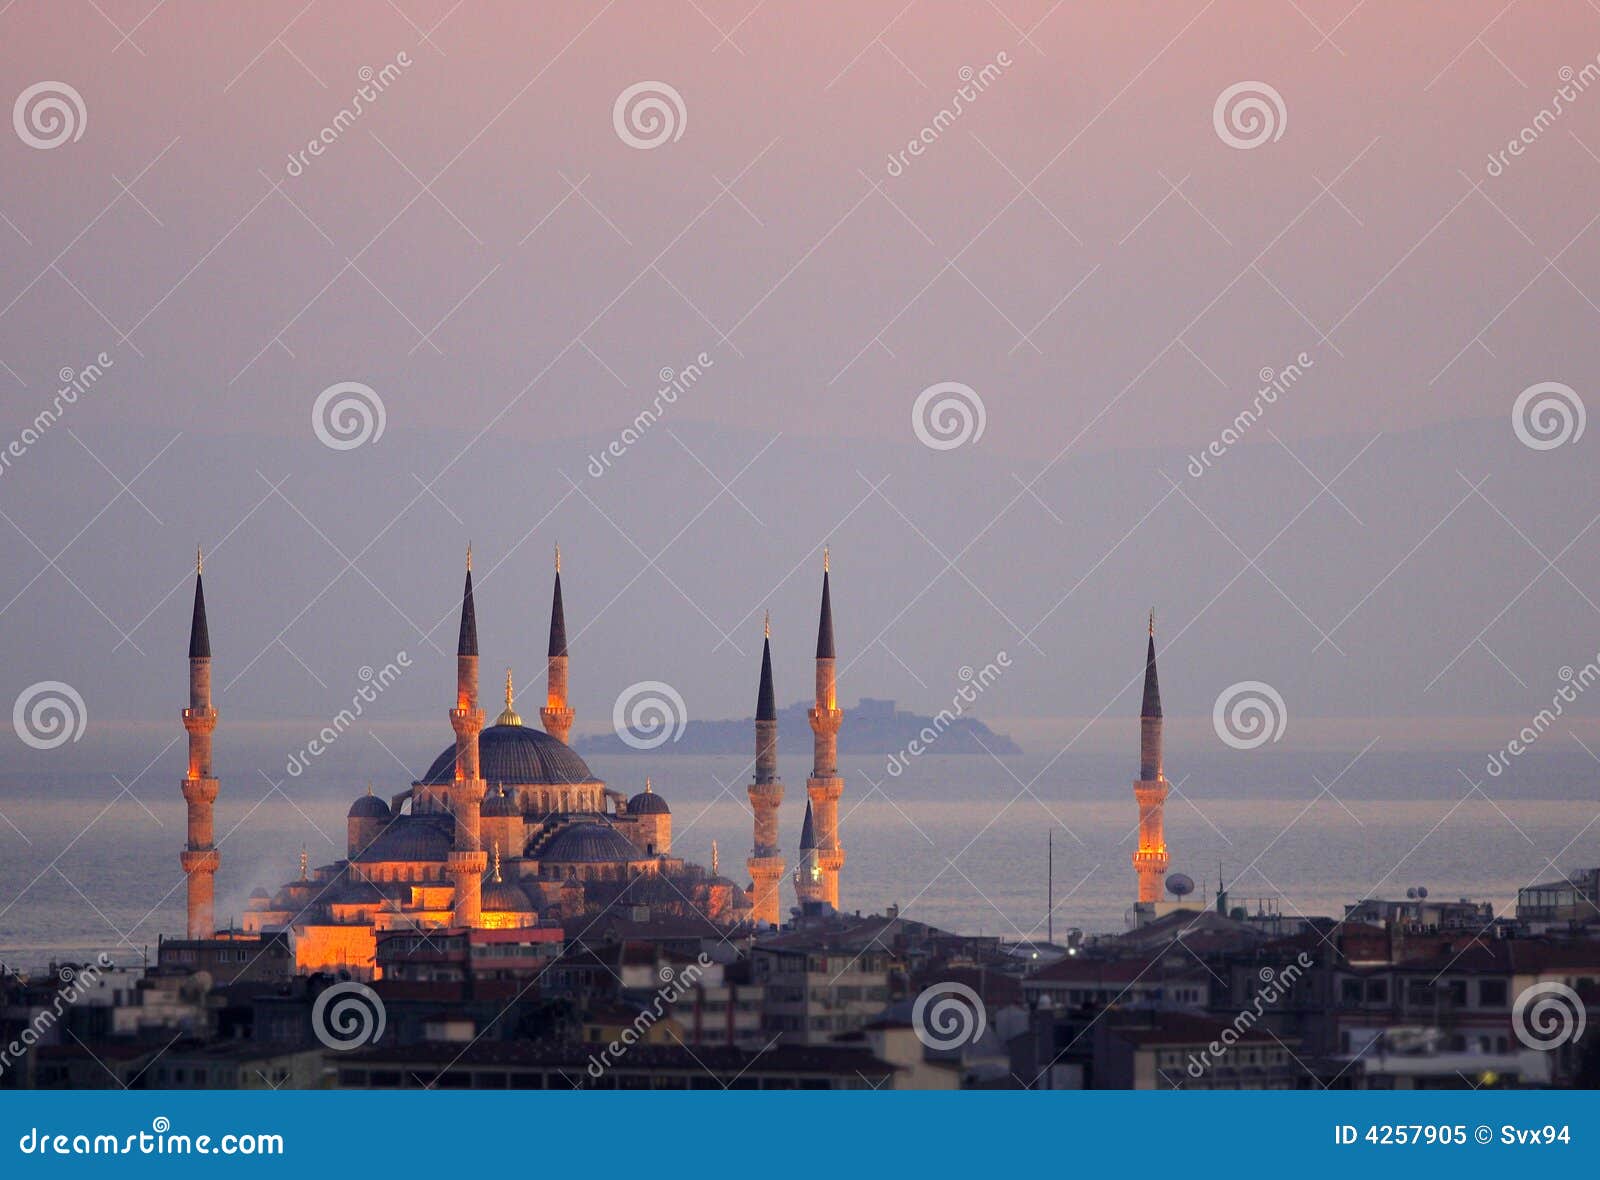 the sultan ahmed mosque - blue mosque of istanbul